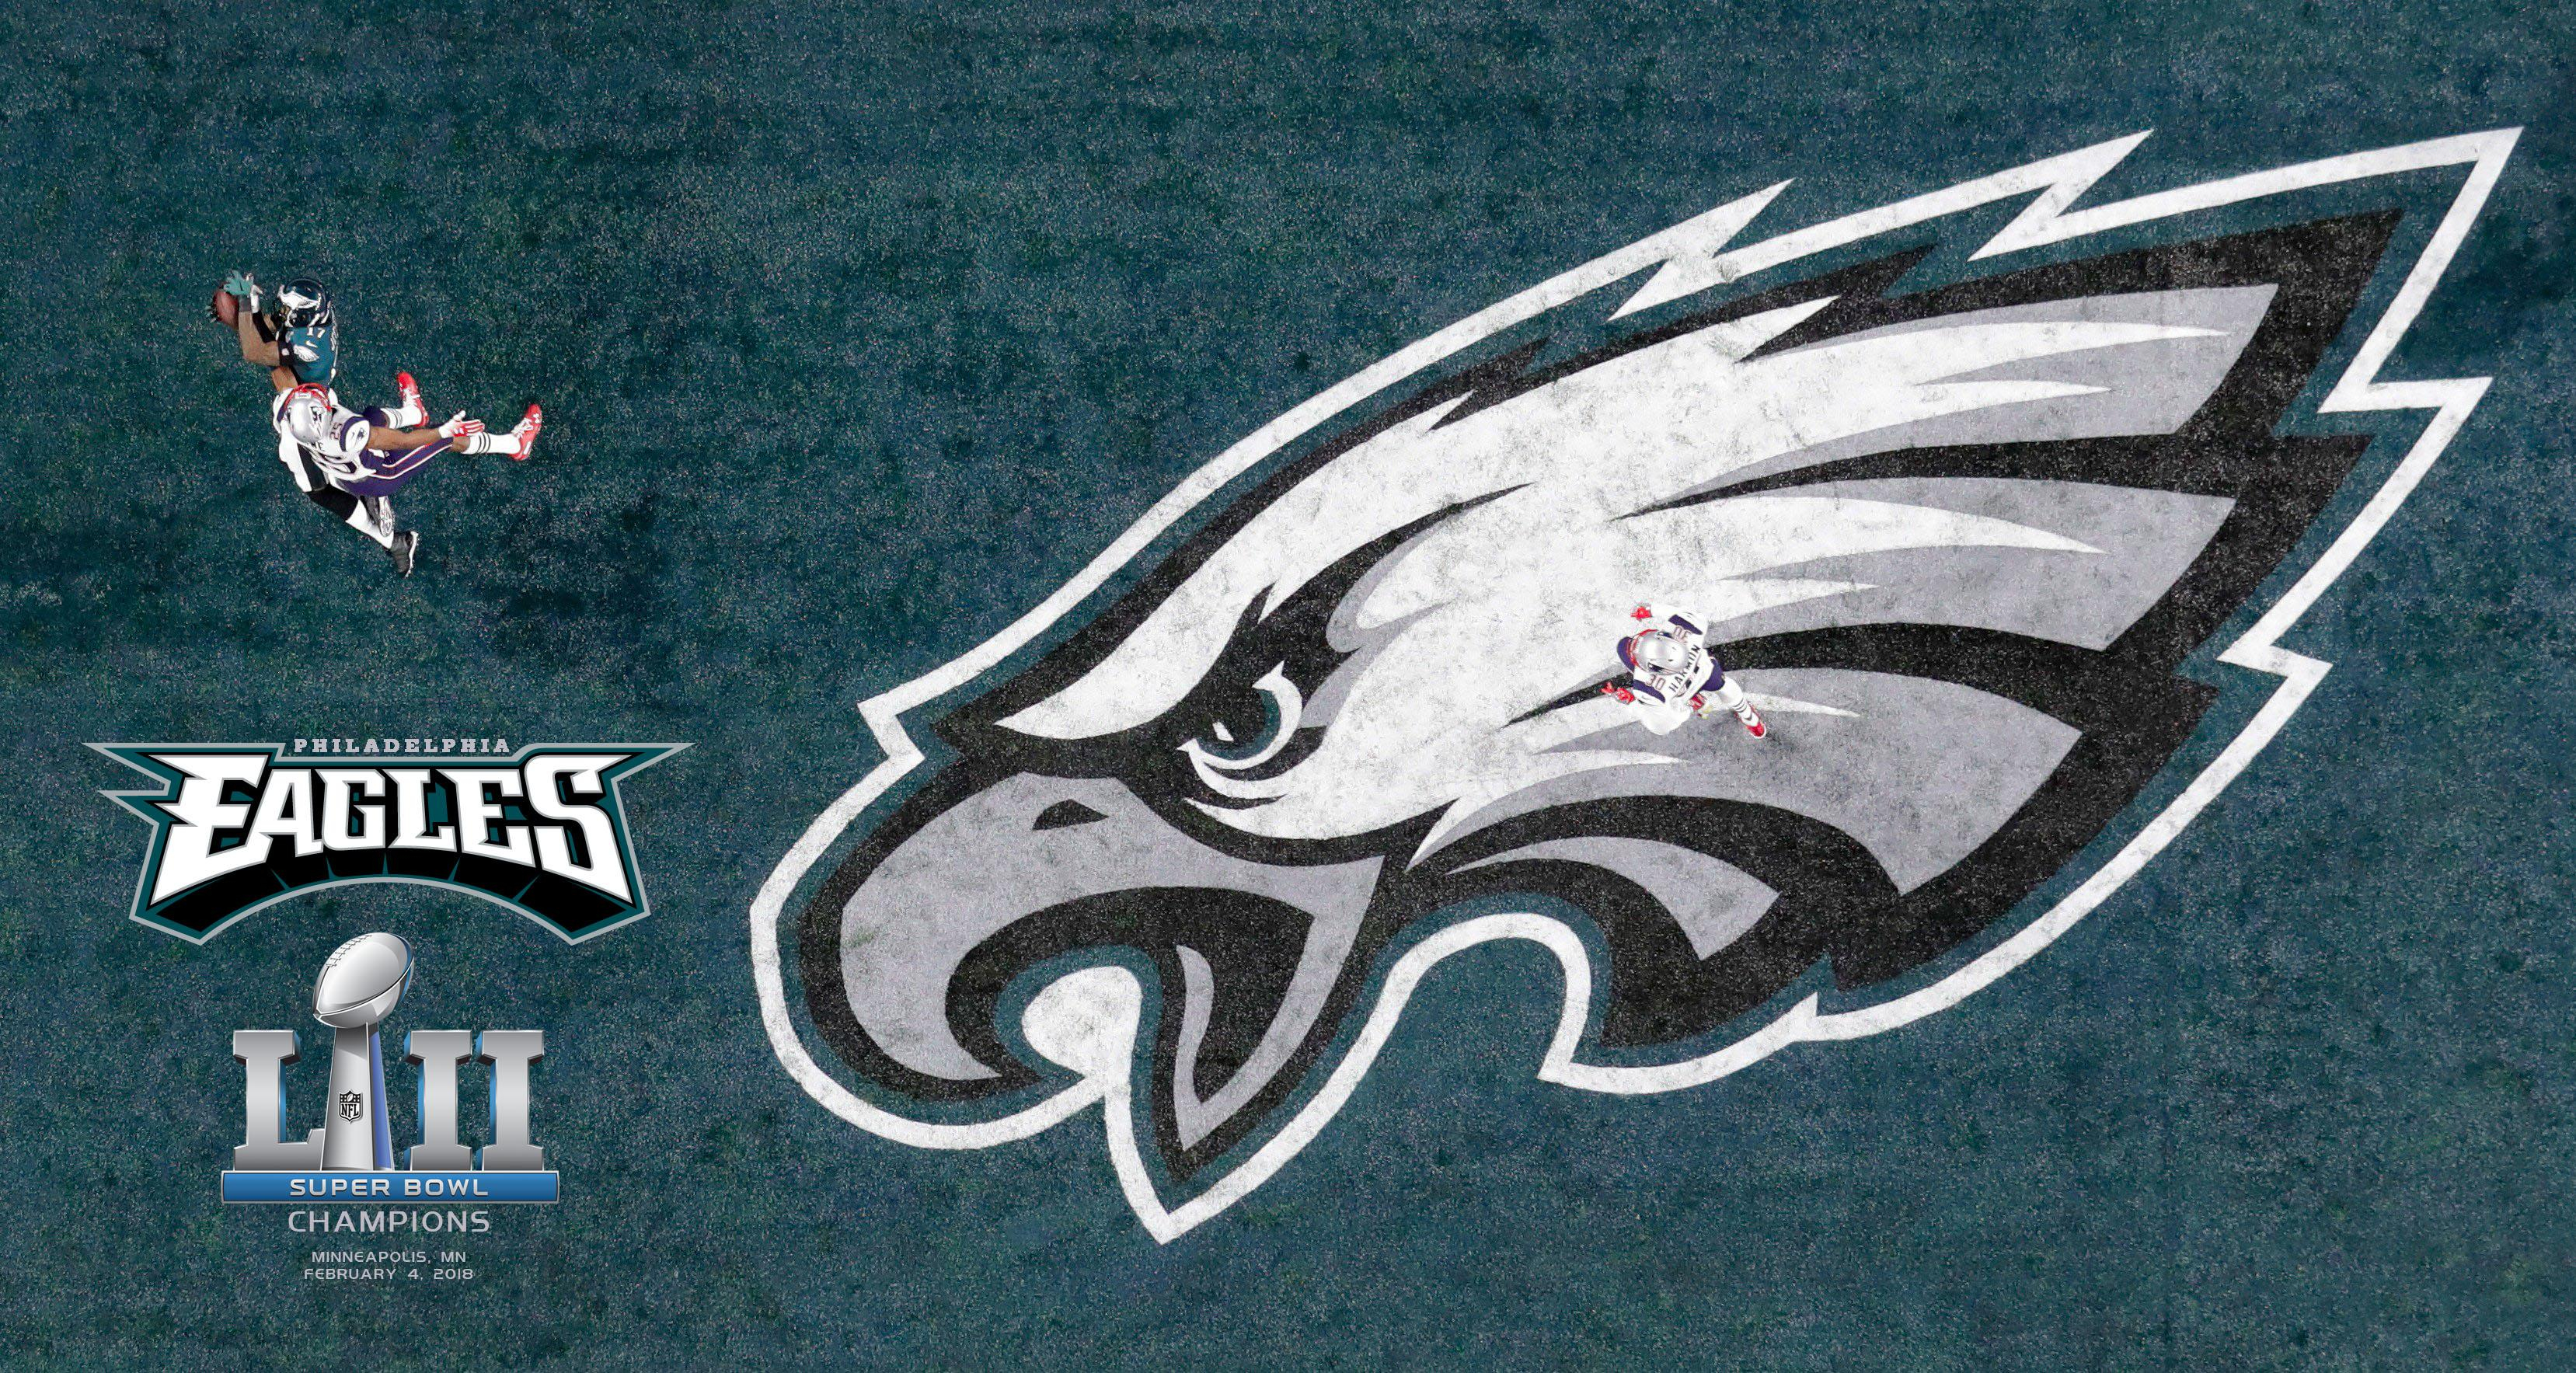 3315x1767 This will be my computer's wallpaper for a long, long time. : r/eagles